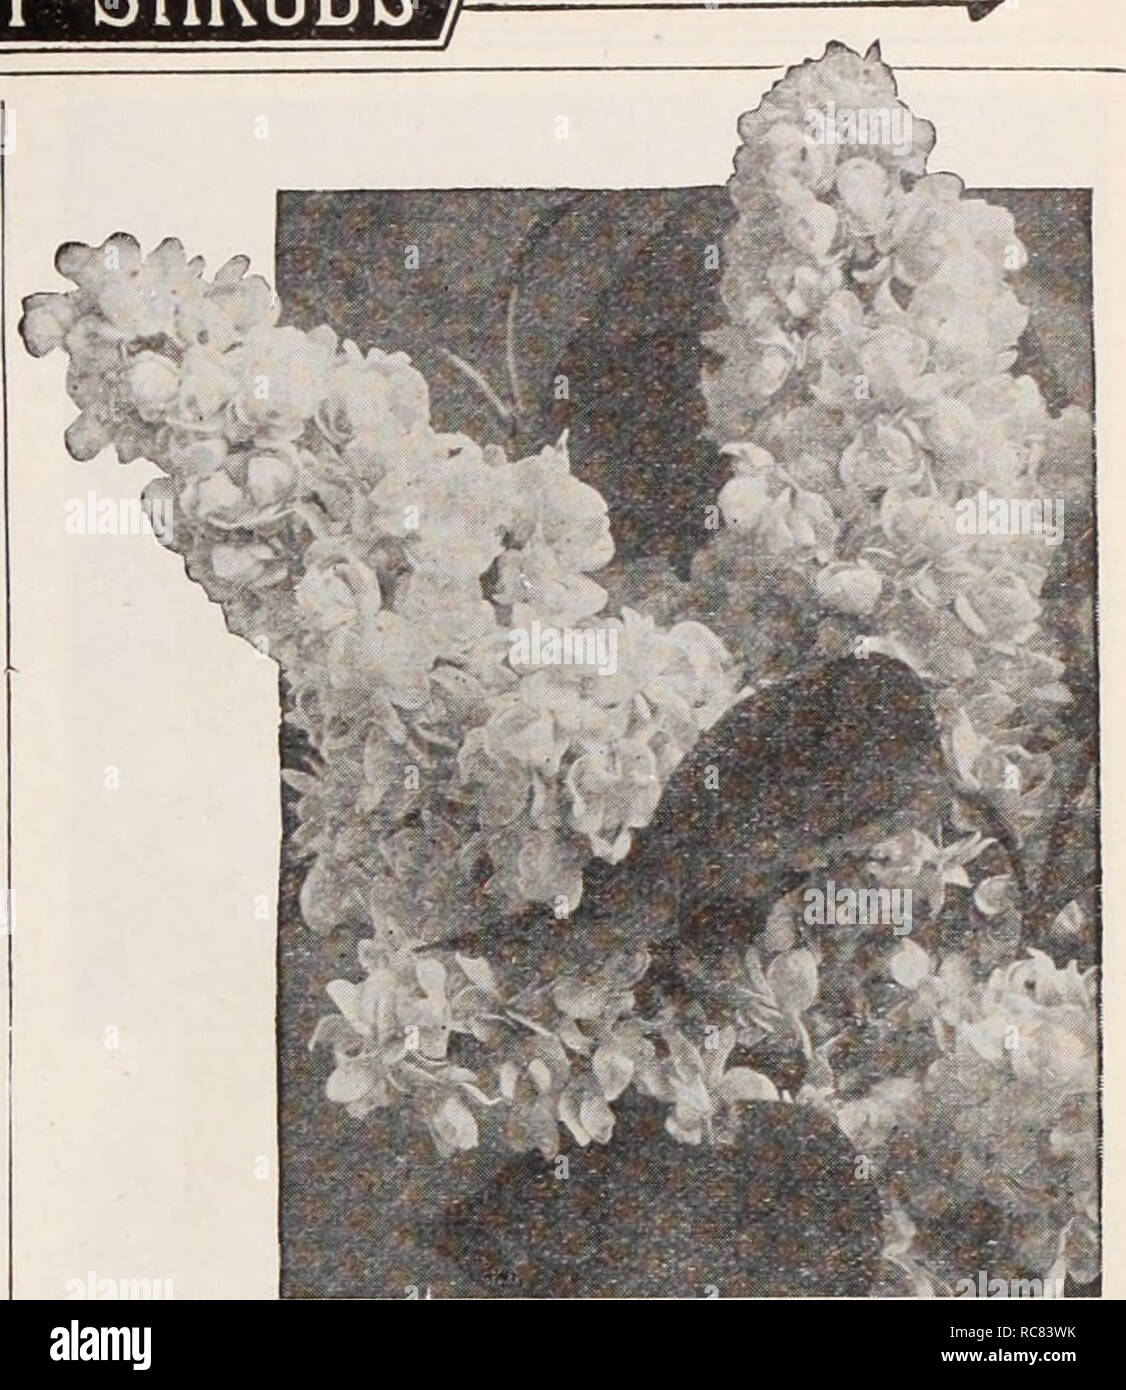 . Dreer's garden book / Henry A. Dreer.. Nursery Catalogue. Spiraea Van Houttei Spiraea Anthony Waterer. A valuable variety; color bright crimson. It is of dwarf, dense growth, never exceeding 30 inches in height; in bloom during the entire summer season. Billiardi. Tall growing. Pink flowers in late summer. Prunif olia fl. pi. {Doable Flowering Bridal Wreath). A favorite variety and one of the best; it is a beautiful shrub of medium size with double white flowers in May. Thunbergi. One of the most charming of all low-growing shrubs, with fine delicate foliage, and a profusion of small white f Stock Photo